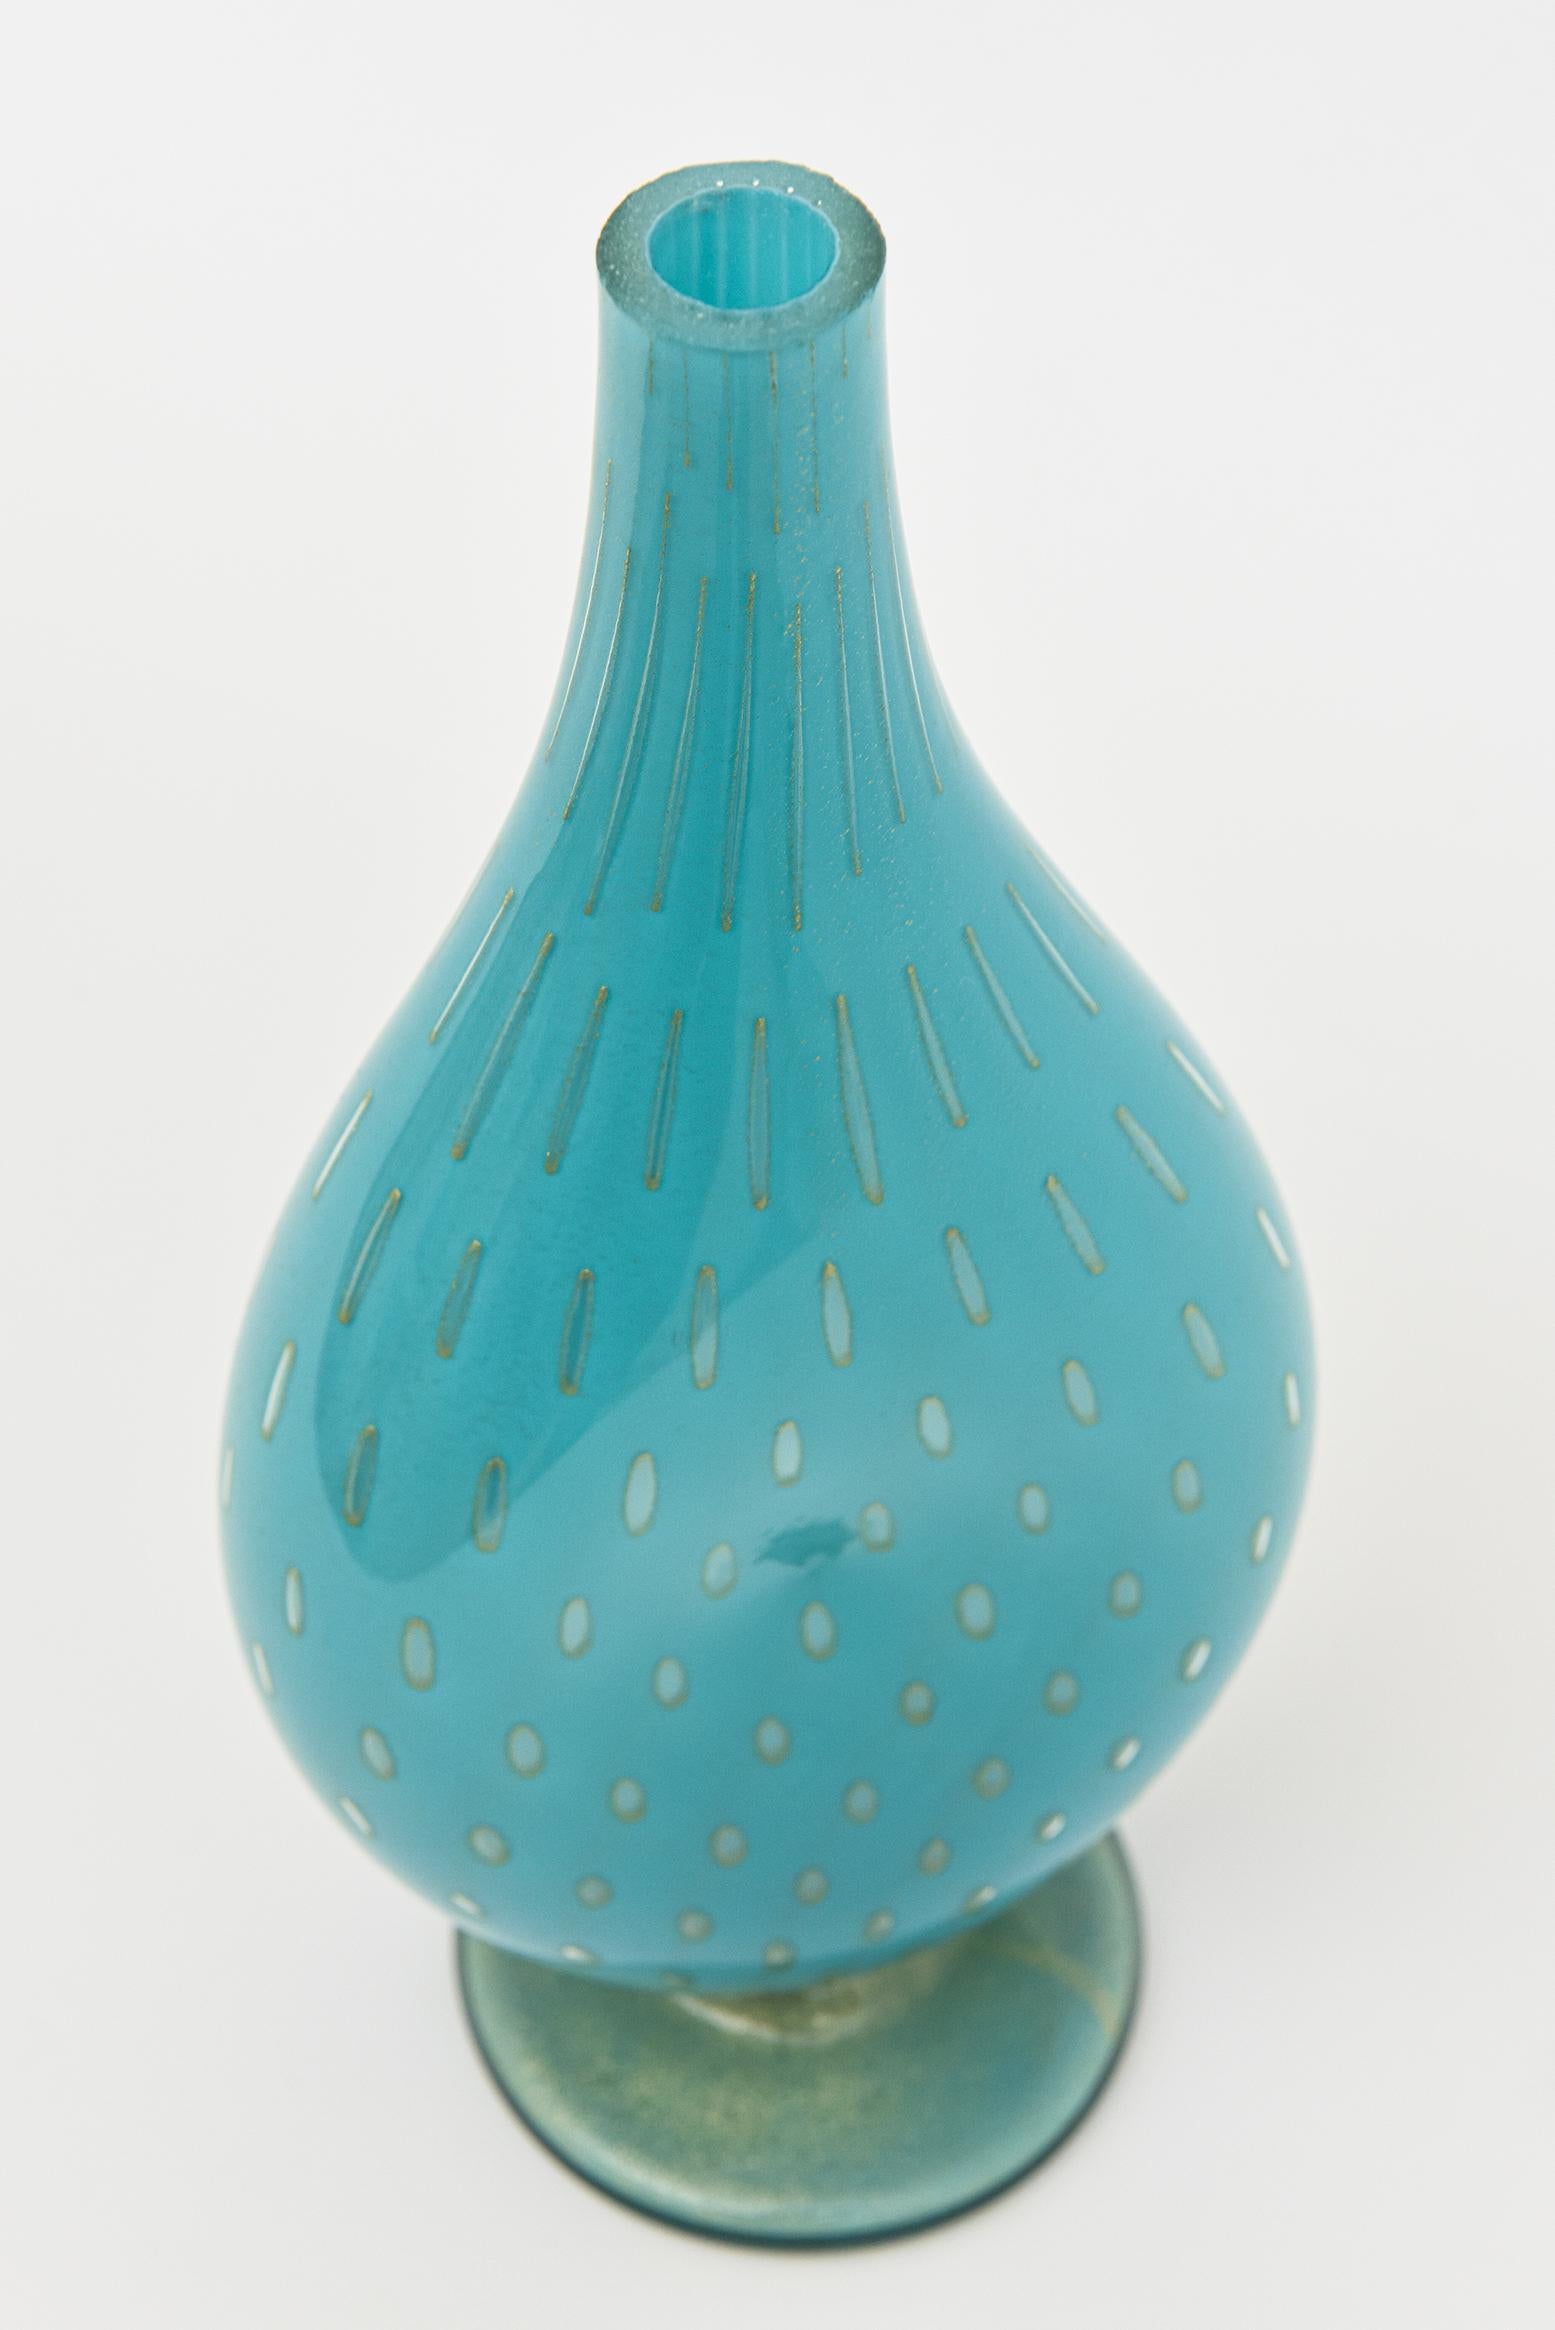 This gorgeous vintage Murano glass bottle, vessel or object is the most spectacular turquoise color which is most desirable and harder to come by. it is by the masters of glass Barovier &Toso. It has a flat cut polished top. The gold aventurine on